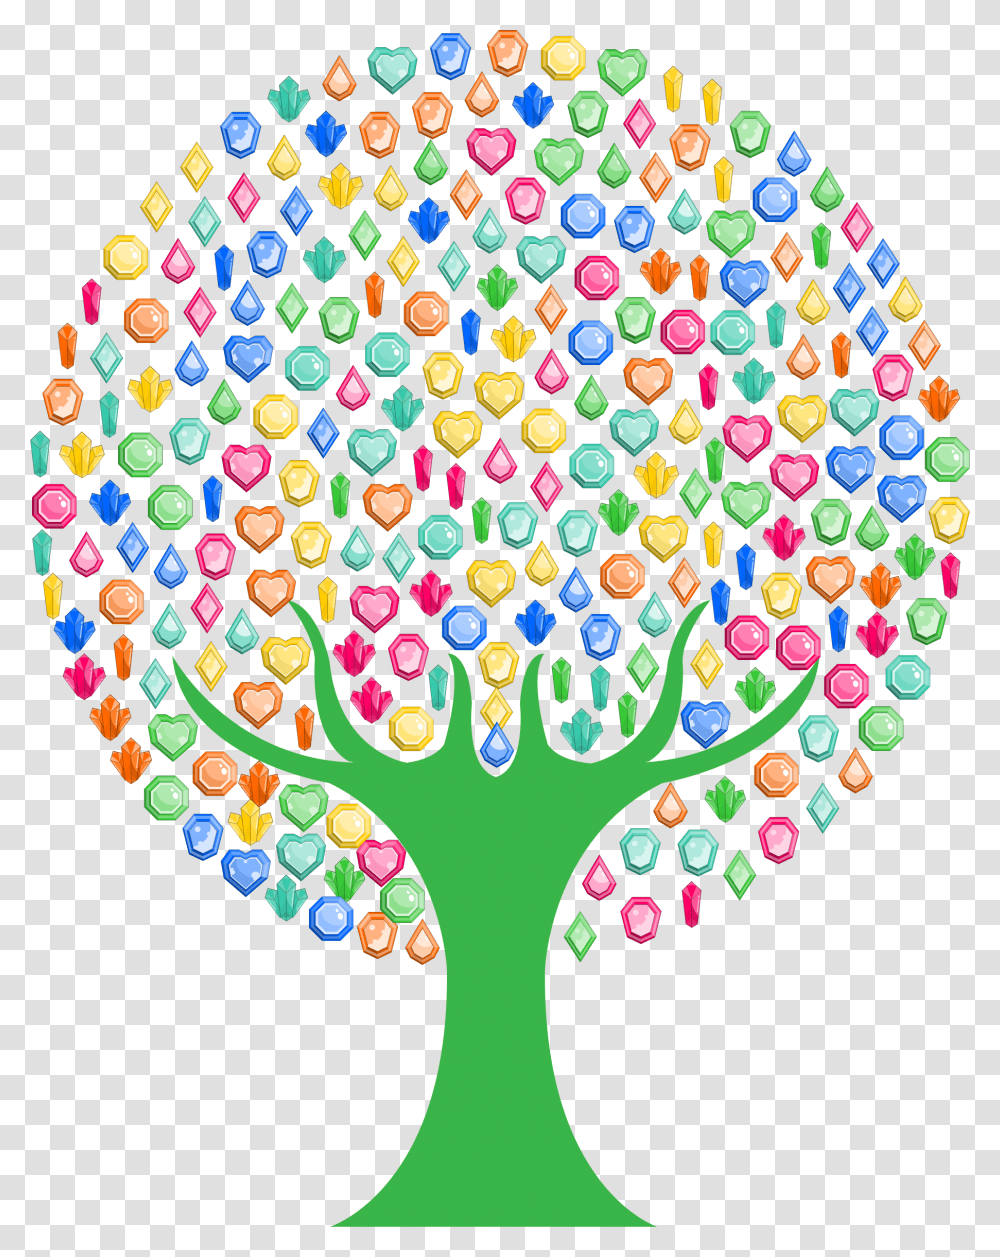 Colorful Gems Tree Clip Arts Colorful Tree Clipart, Doodle, Drawing, Modern Art Transparent Png